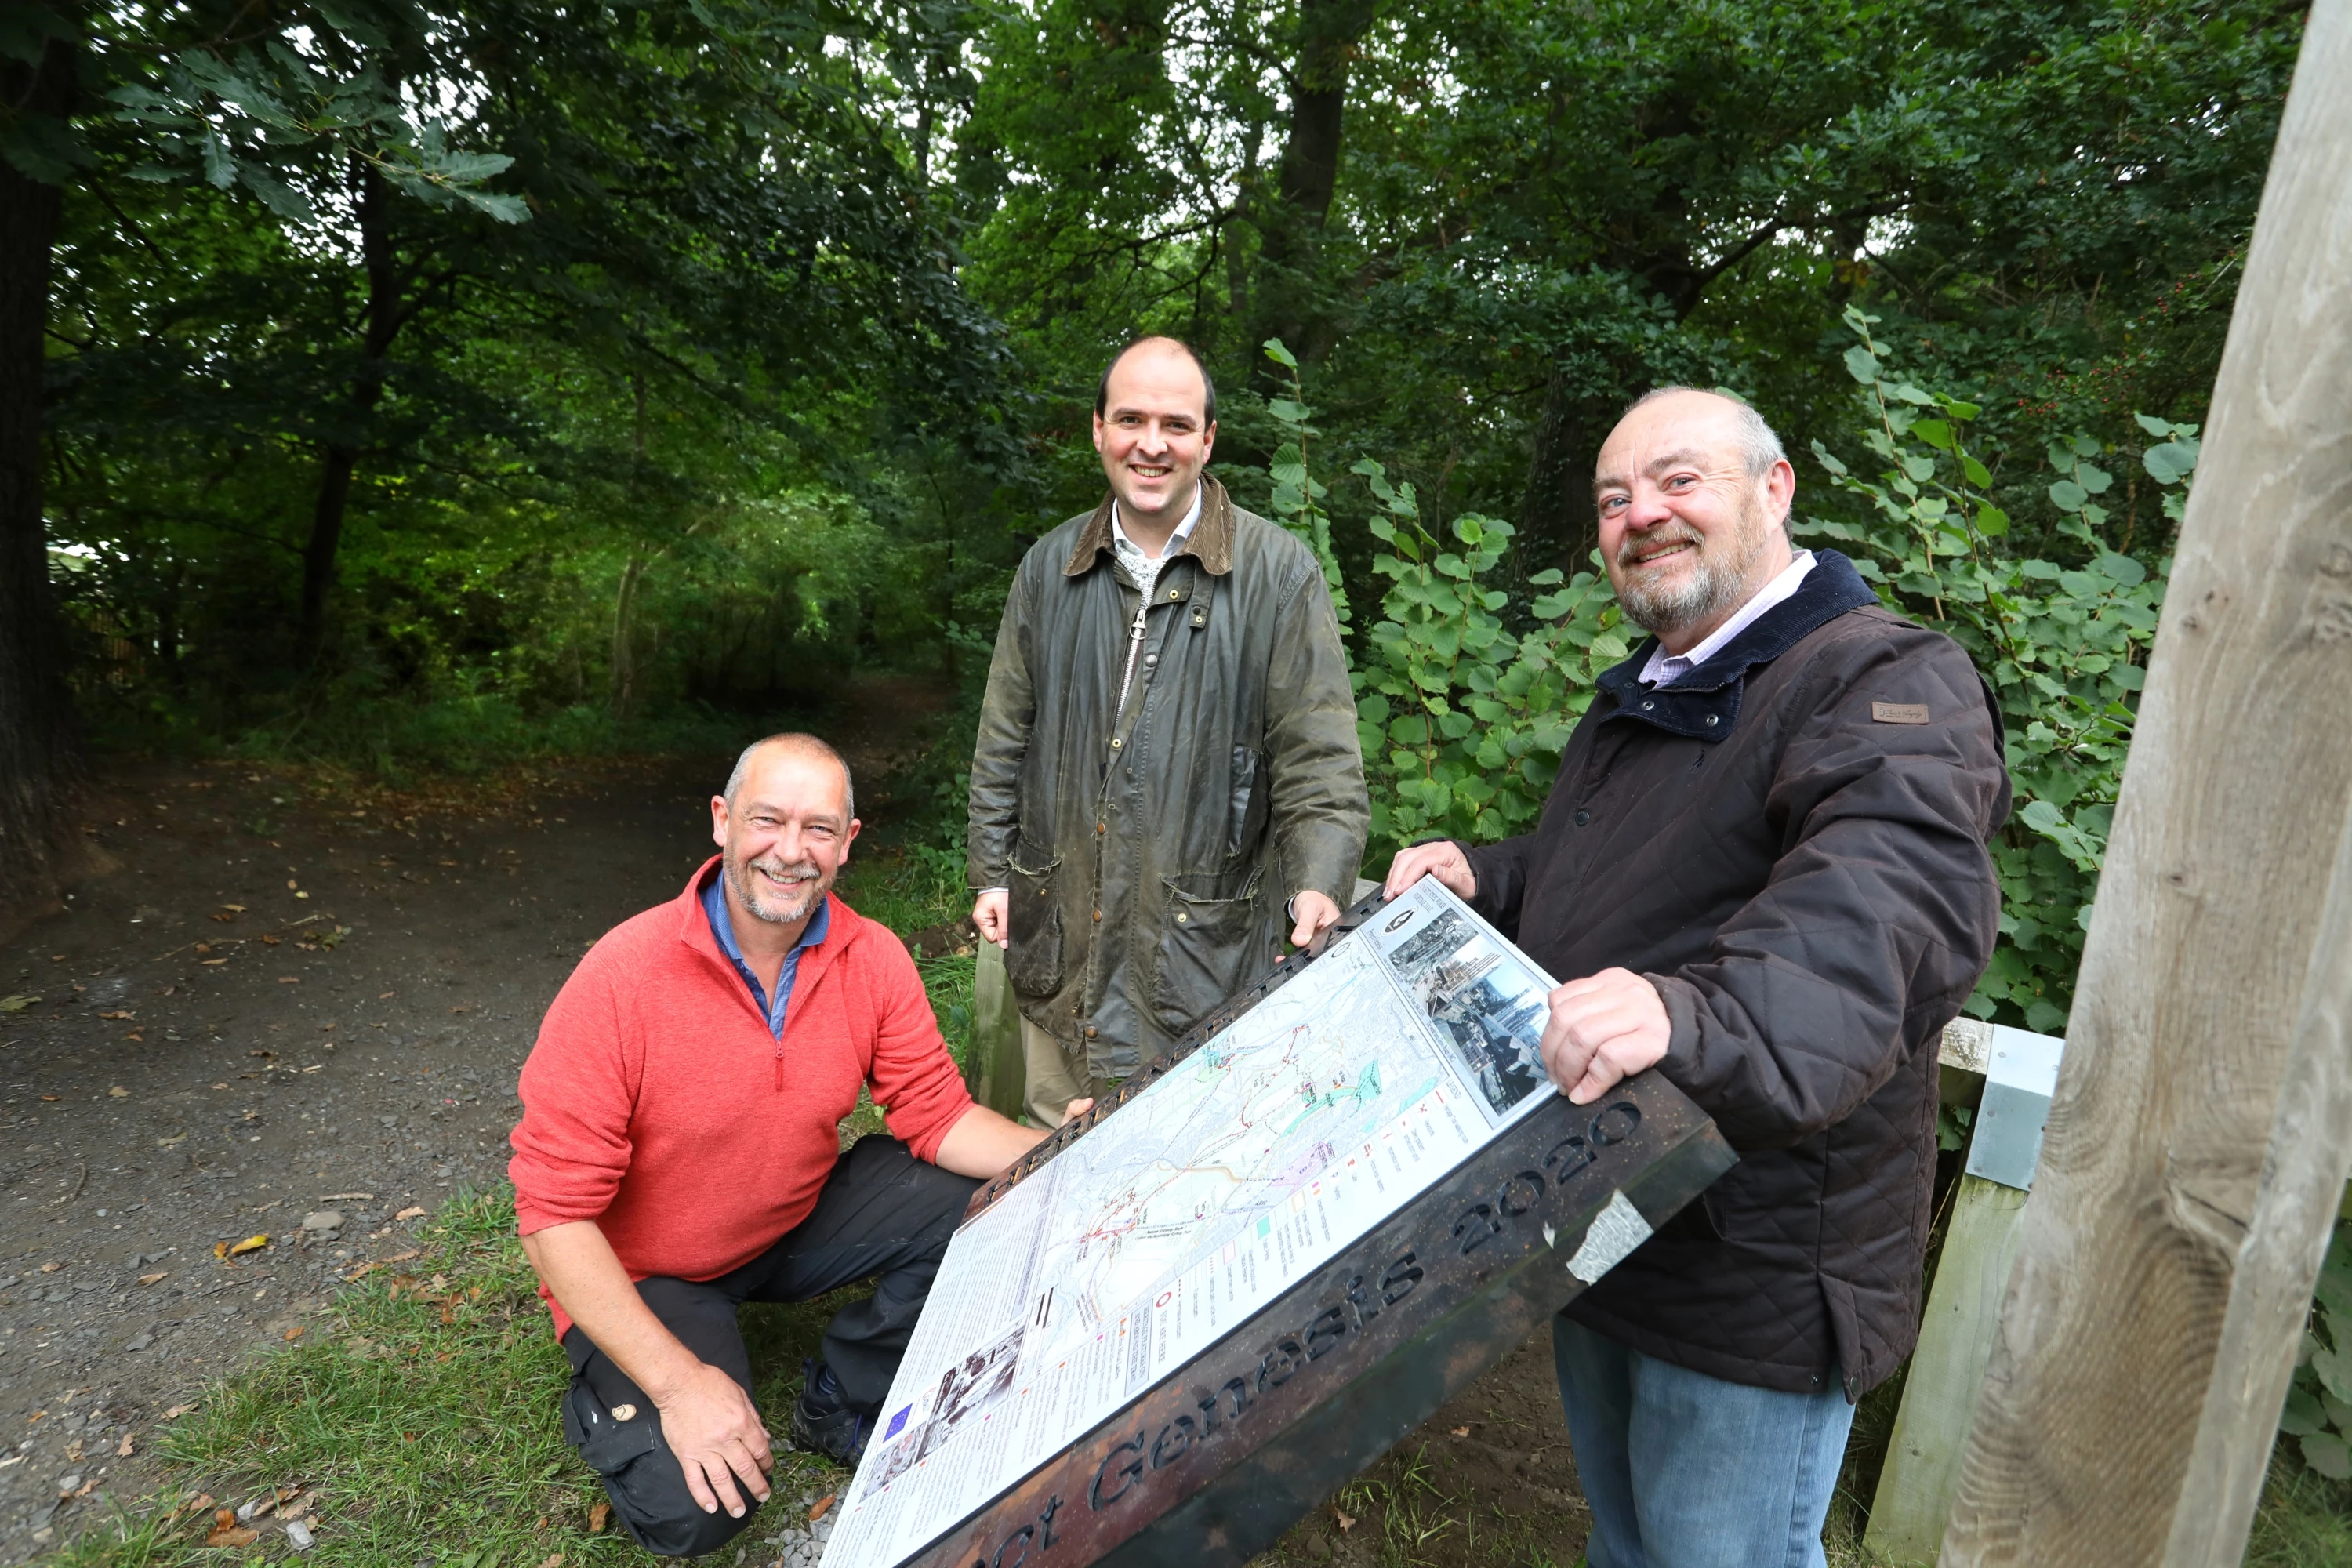 Mike Clark (left) and John O’Connor (right) of Project Genesis Trust with Richard Holden MP (centre) next to new signage on the Consett Heritage Trail.